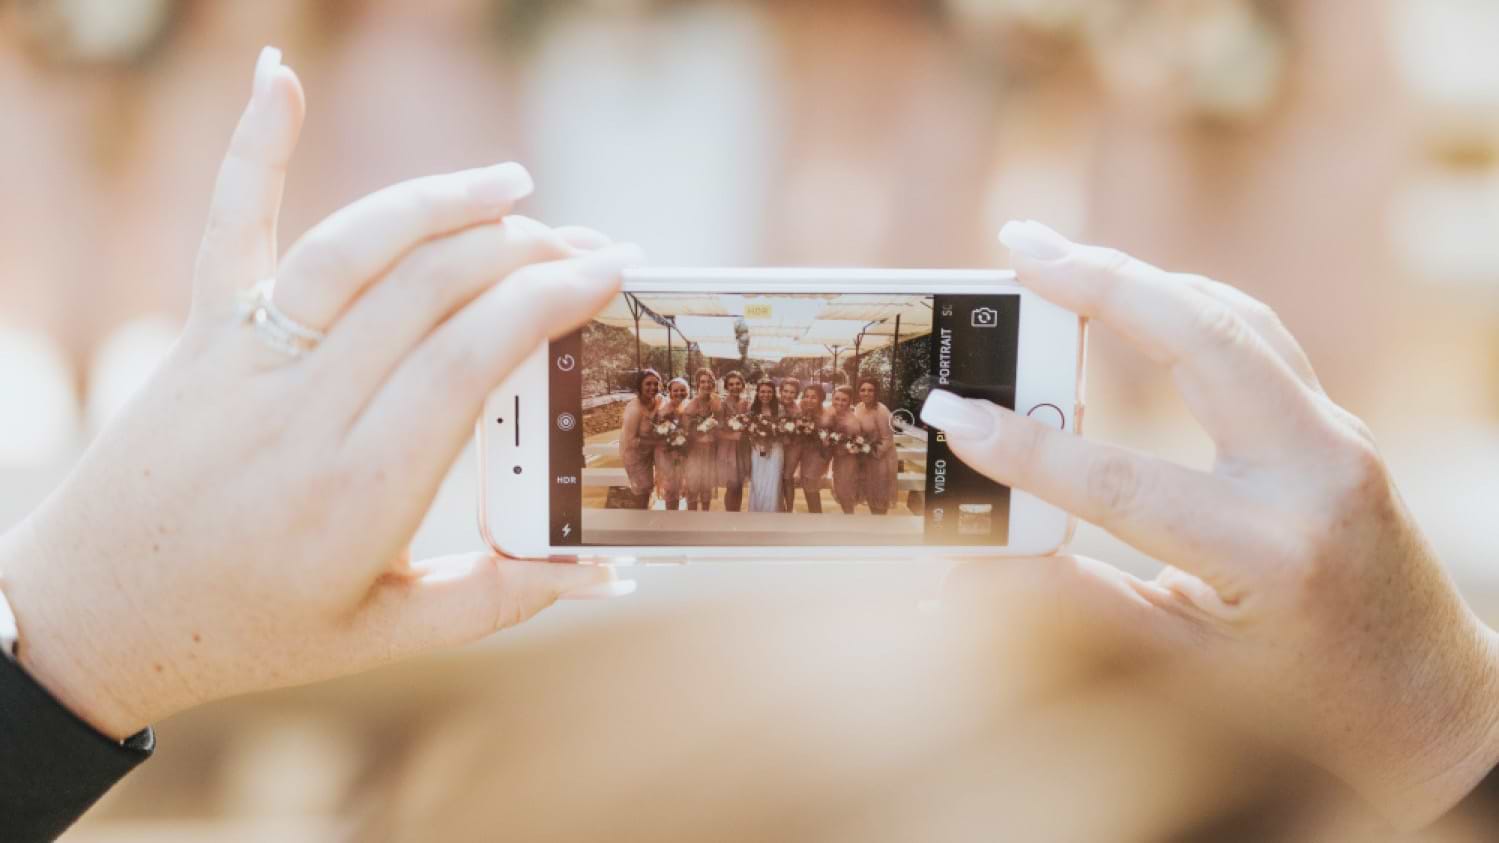 The ultimate guide to live-streaming your wedding